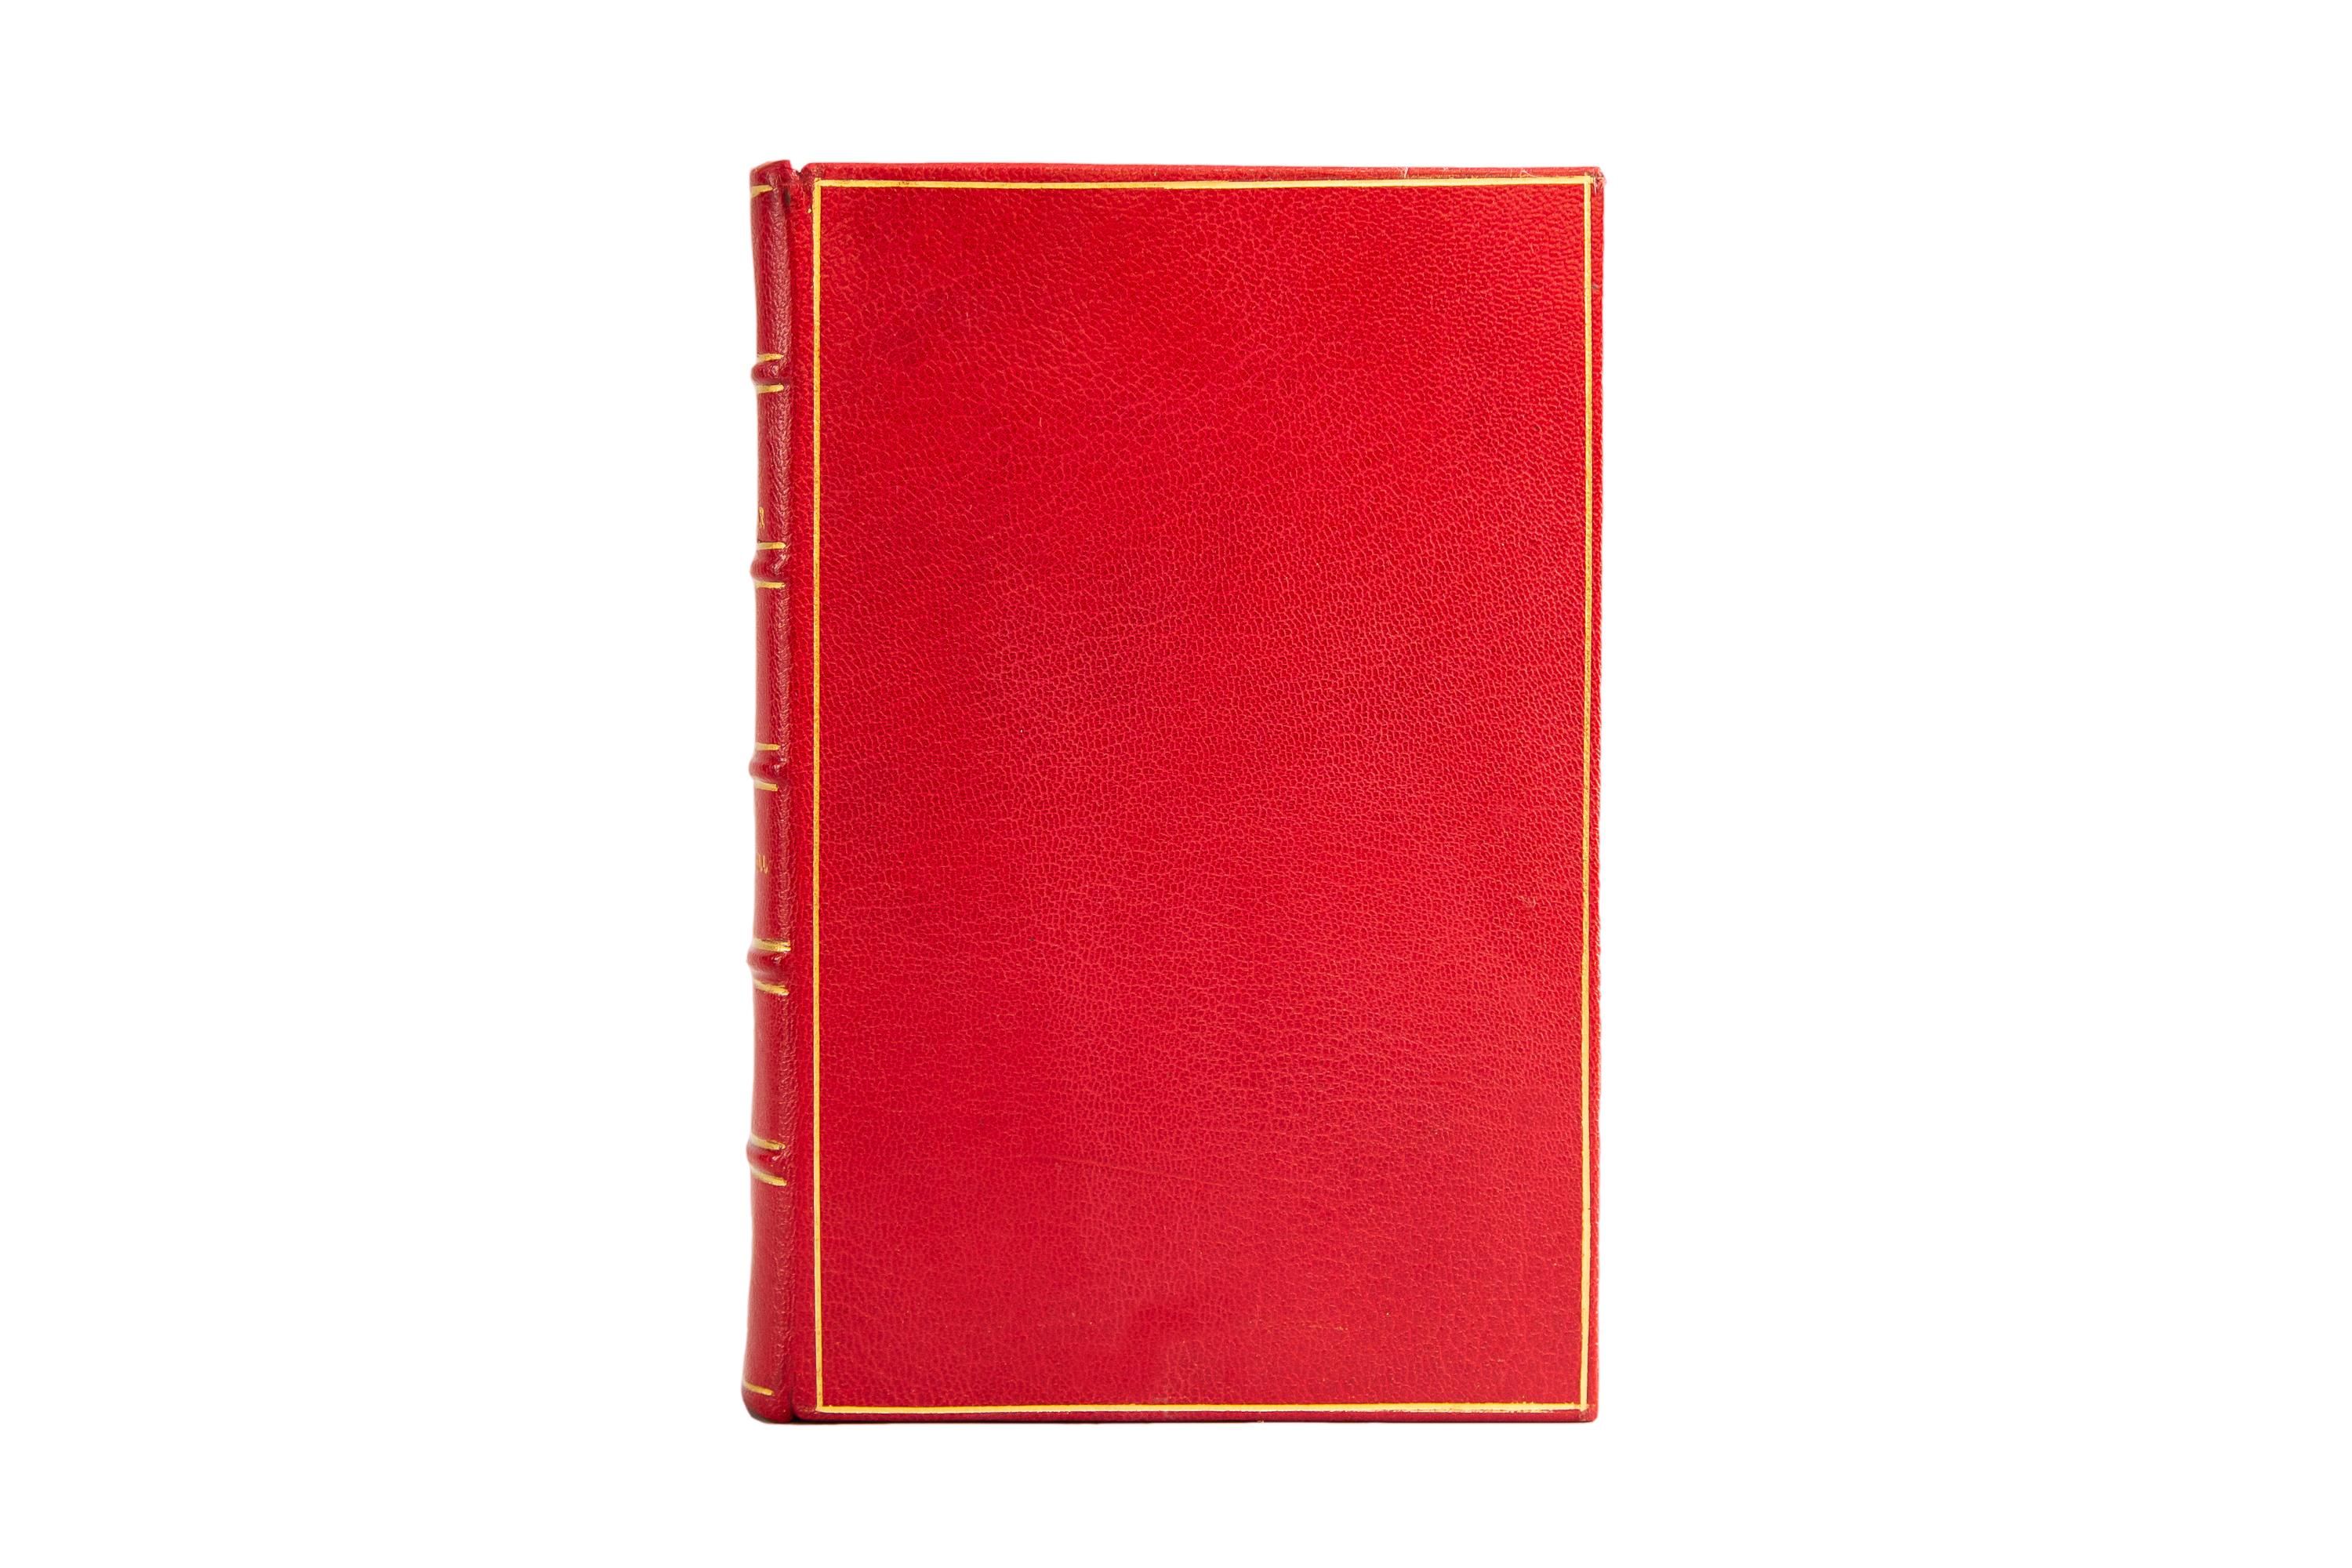 6 Volumes. Sir Winston S.Churchill. Second World War. Rebound in full red morocco, all edges gilt, raised bands, gilt panels. Published: London:
Cassell & Co. 1948-54 First Editions.